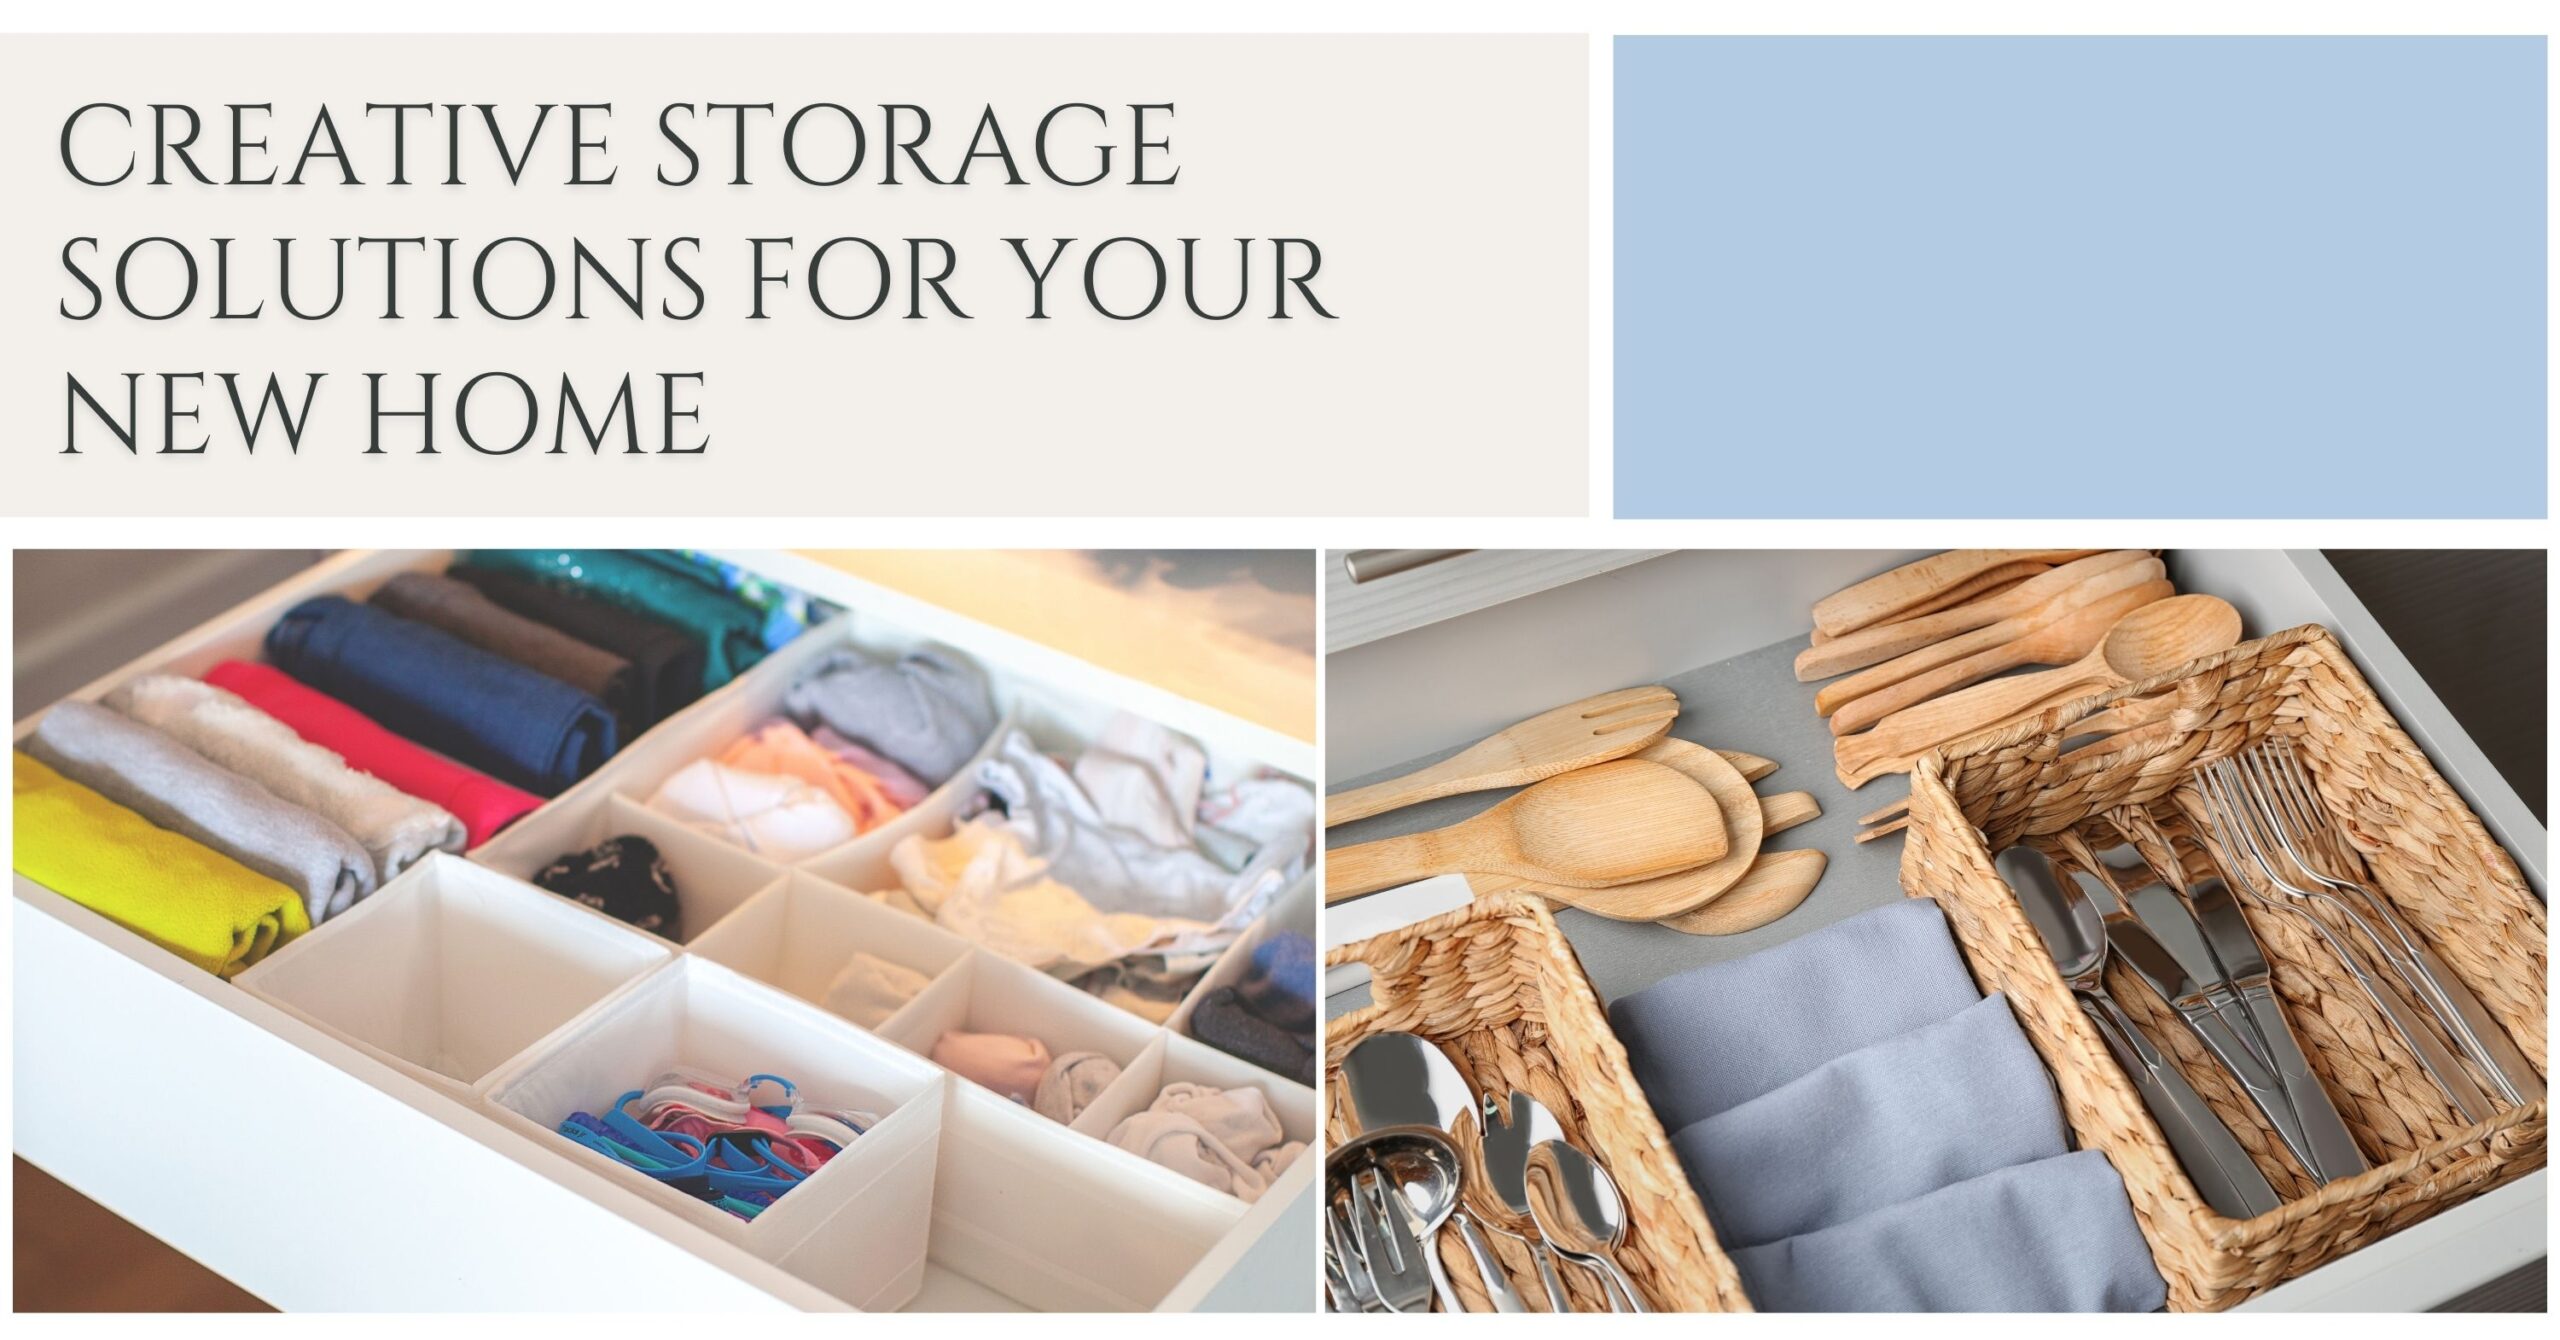 Creative Storage Solutions for your New Home